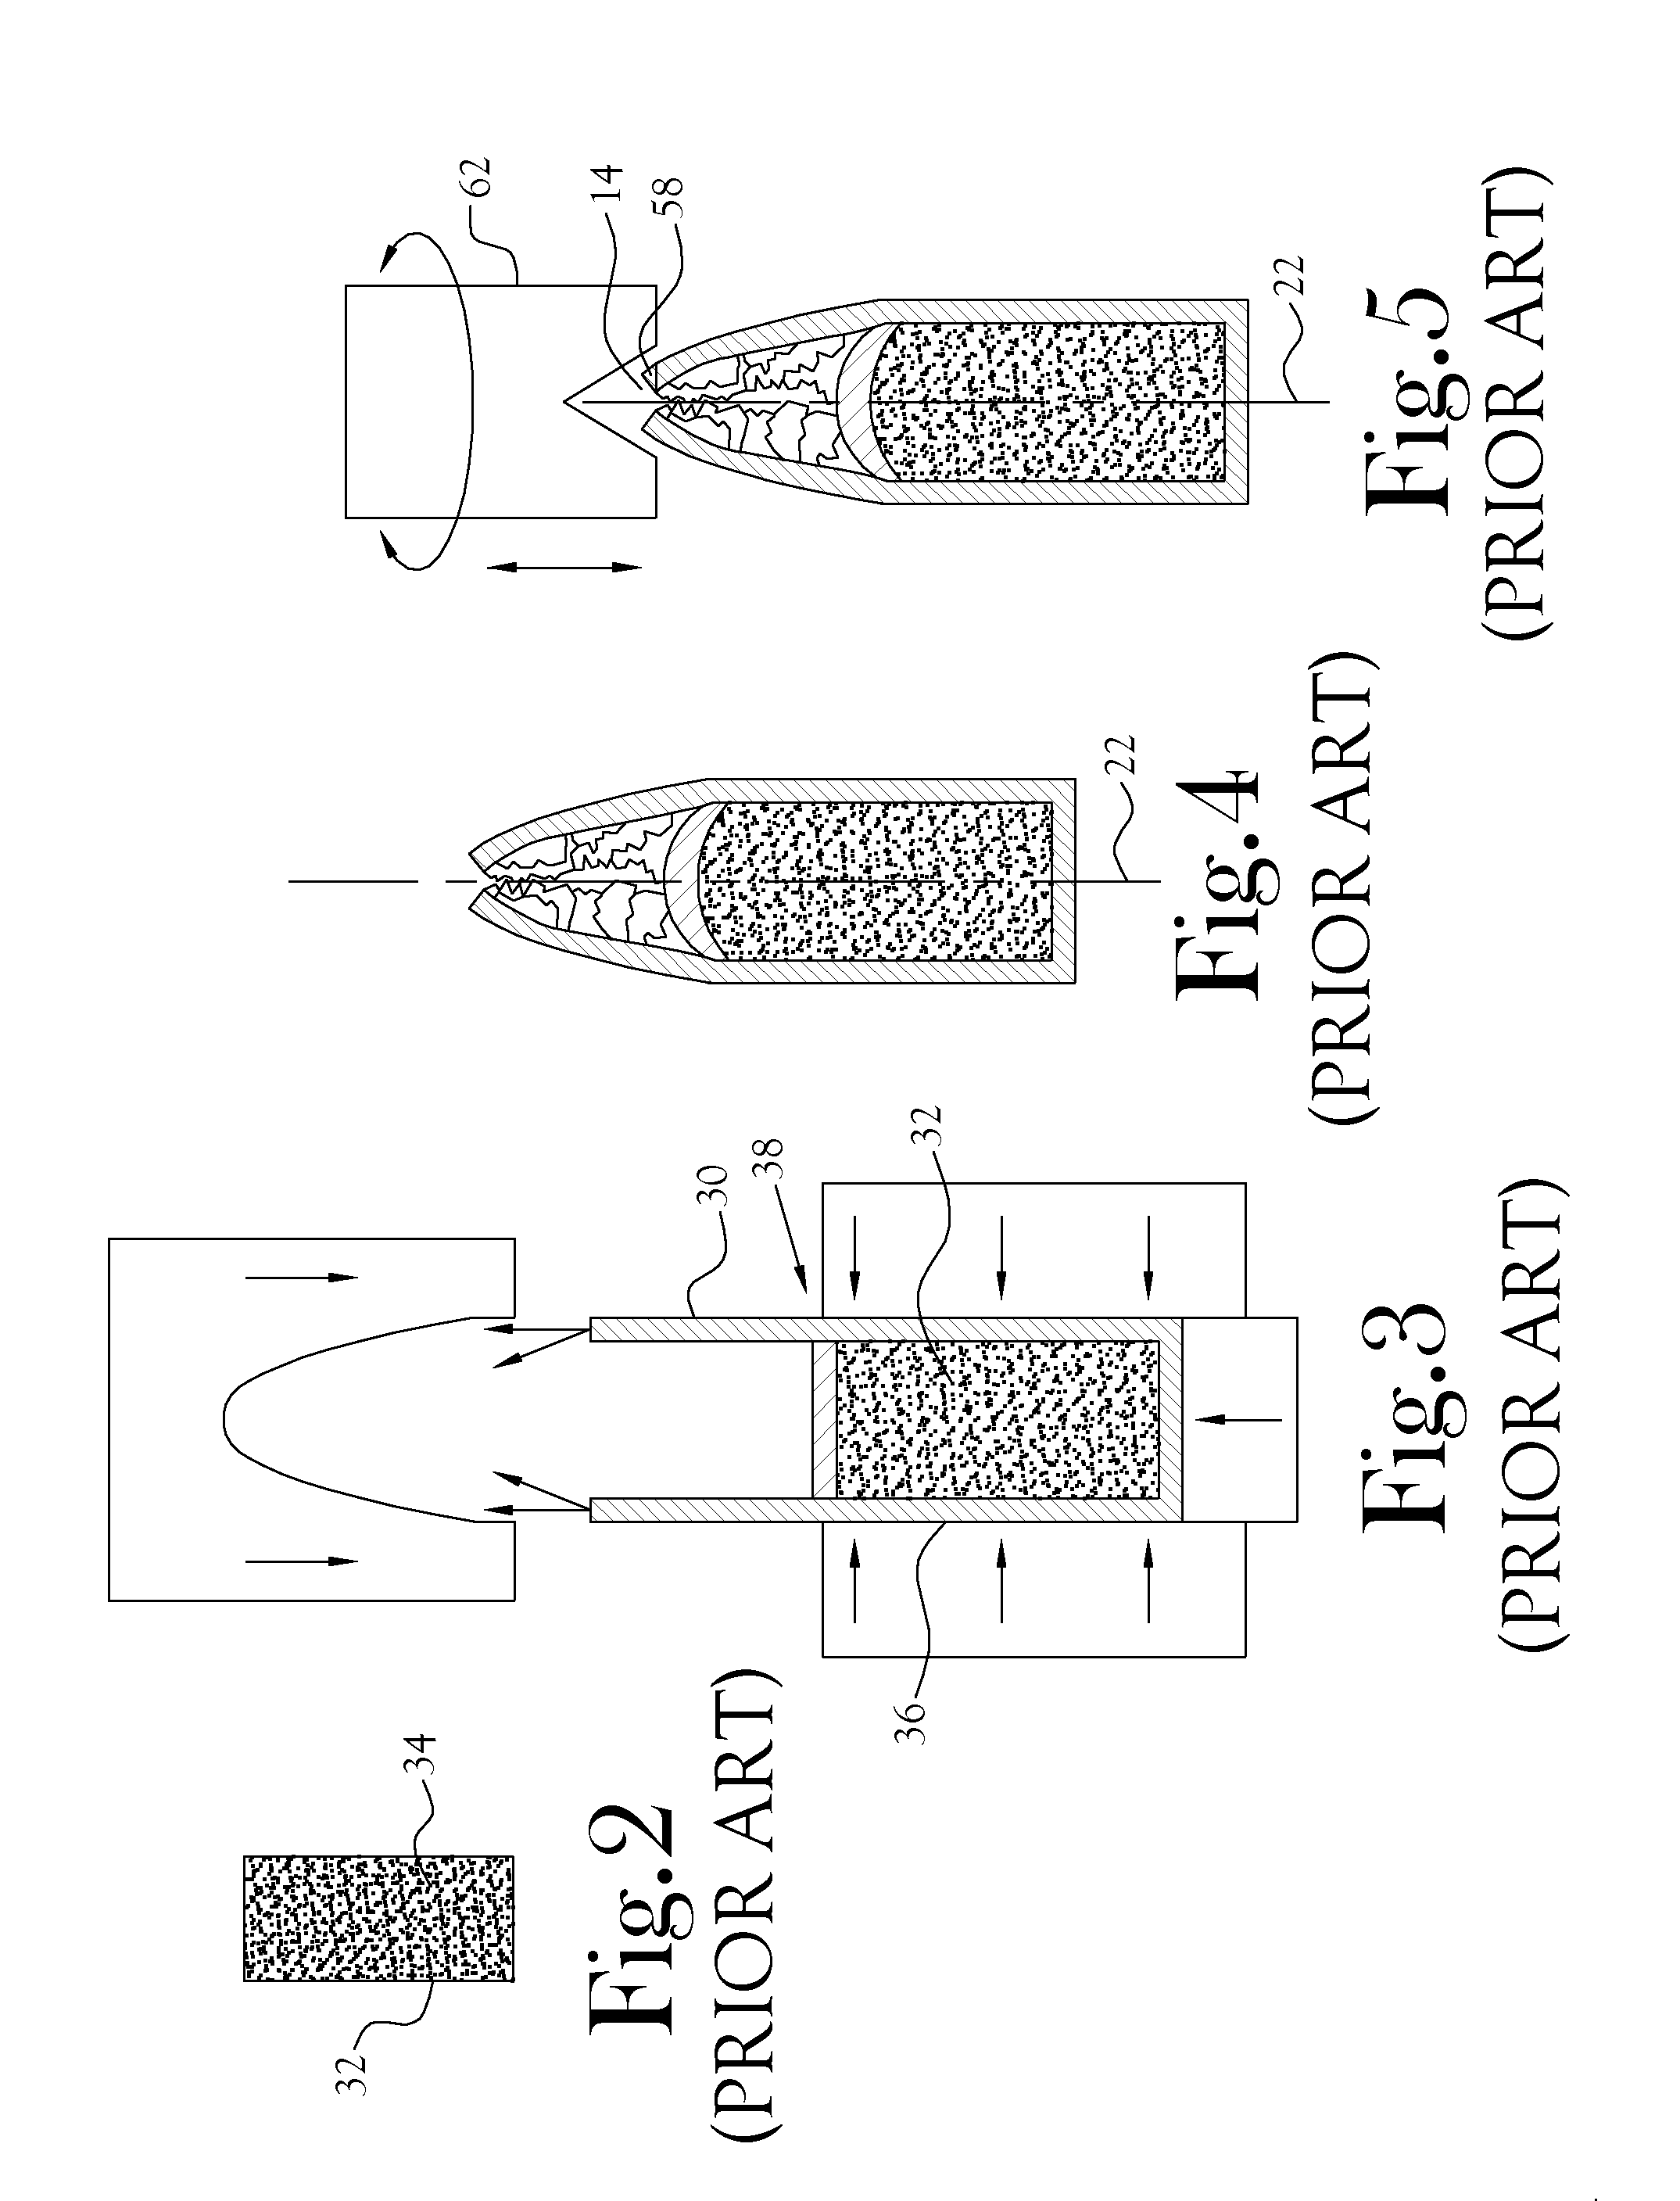 Method of Enhancing the External Ballistics and Ensuring Consistent Terminal Ballistics of an Ammunition Projectile and Product Obtained